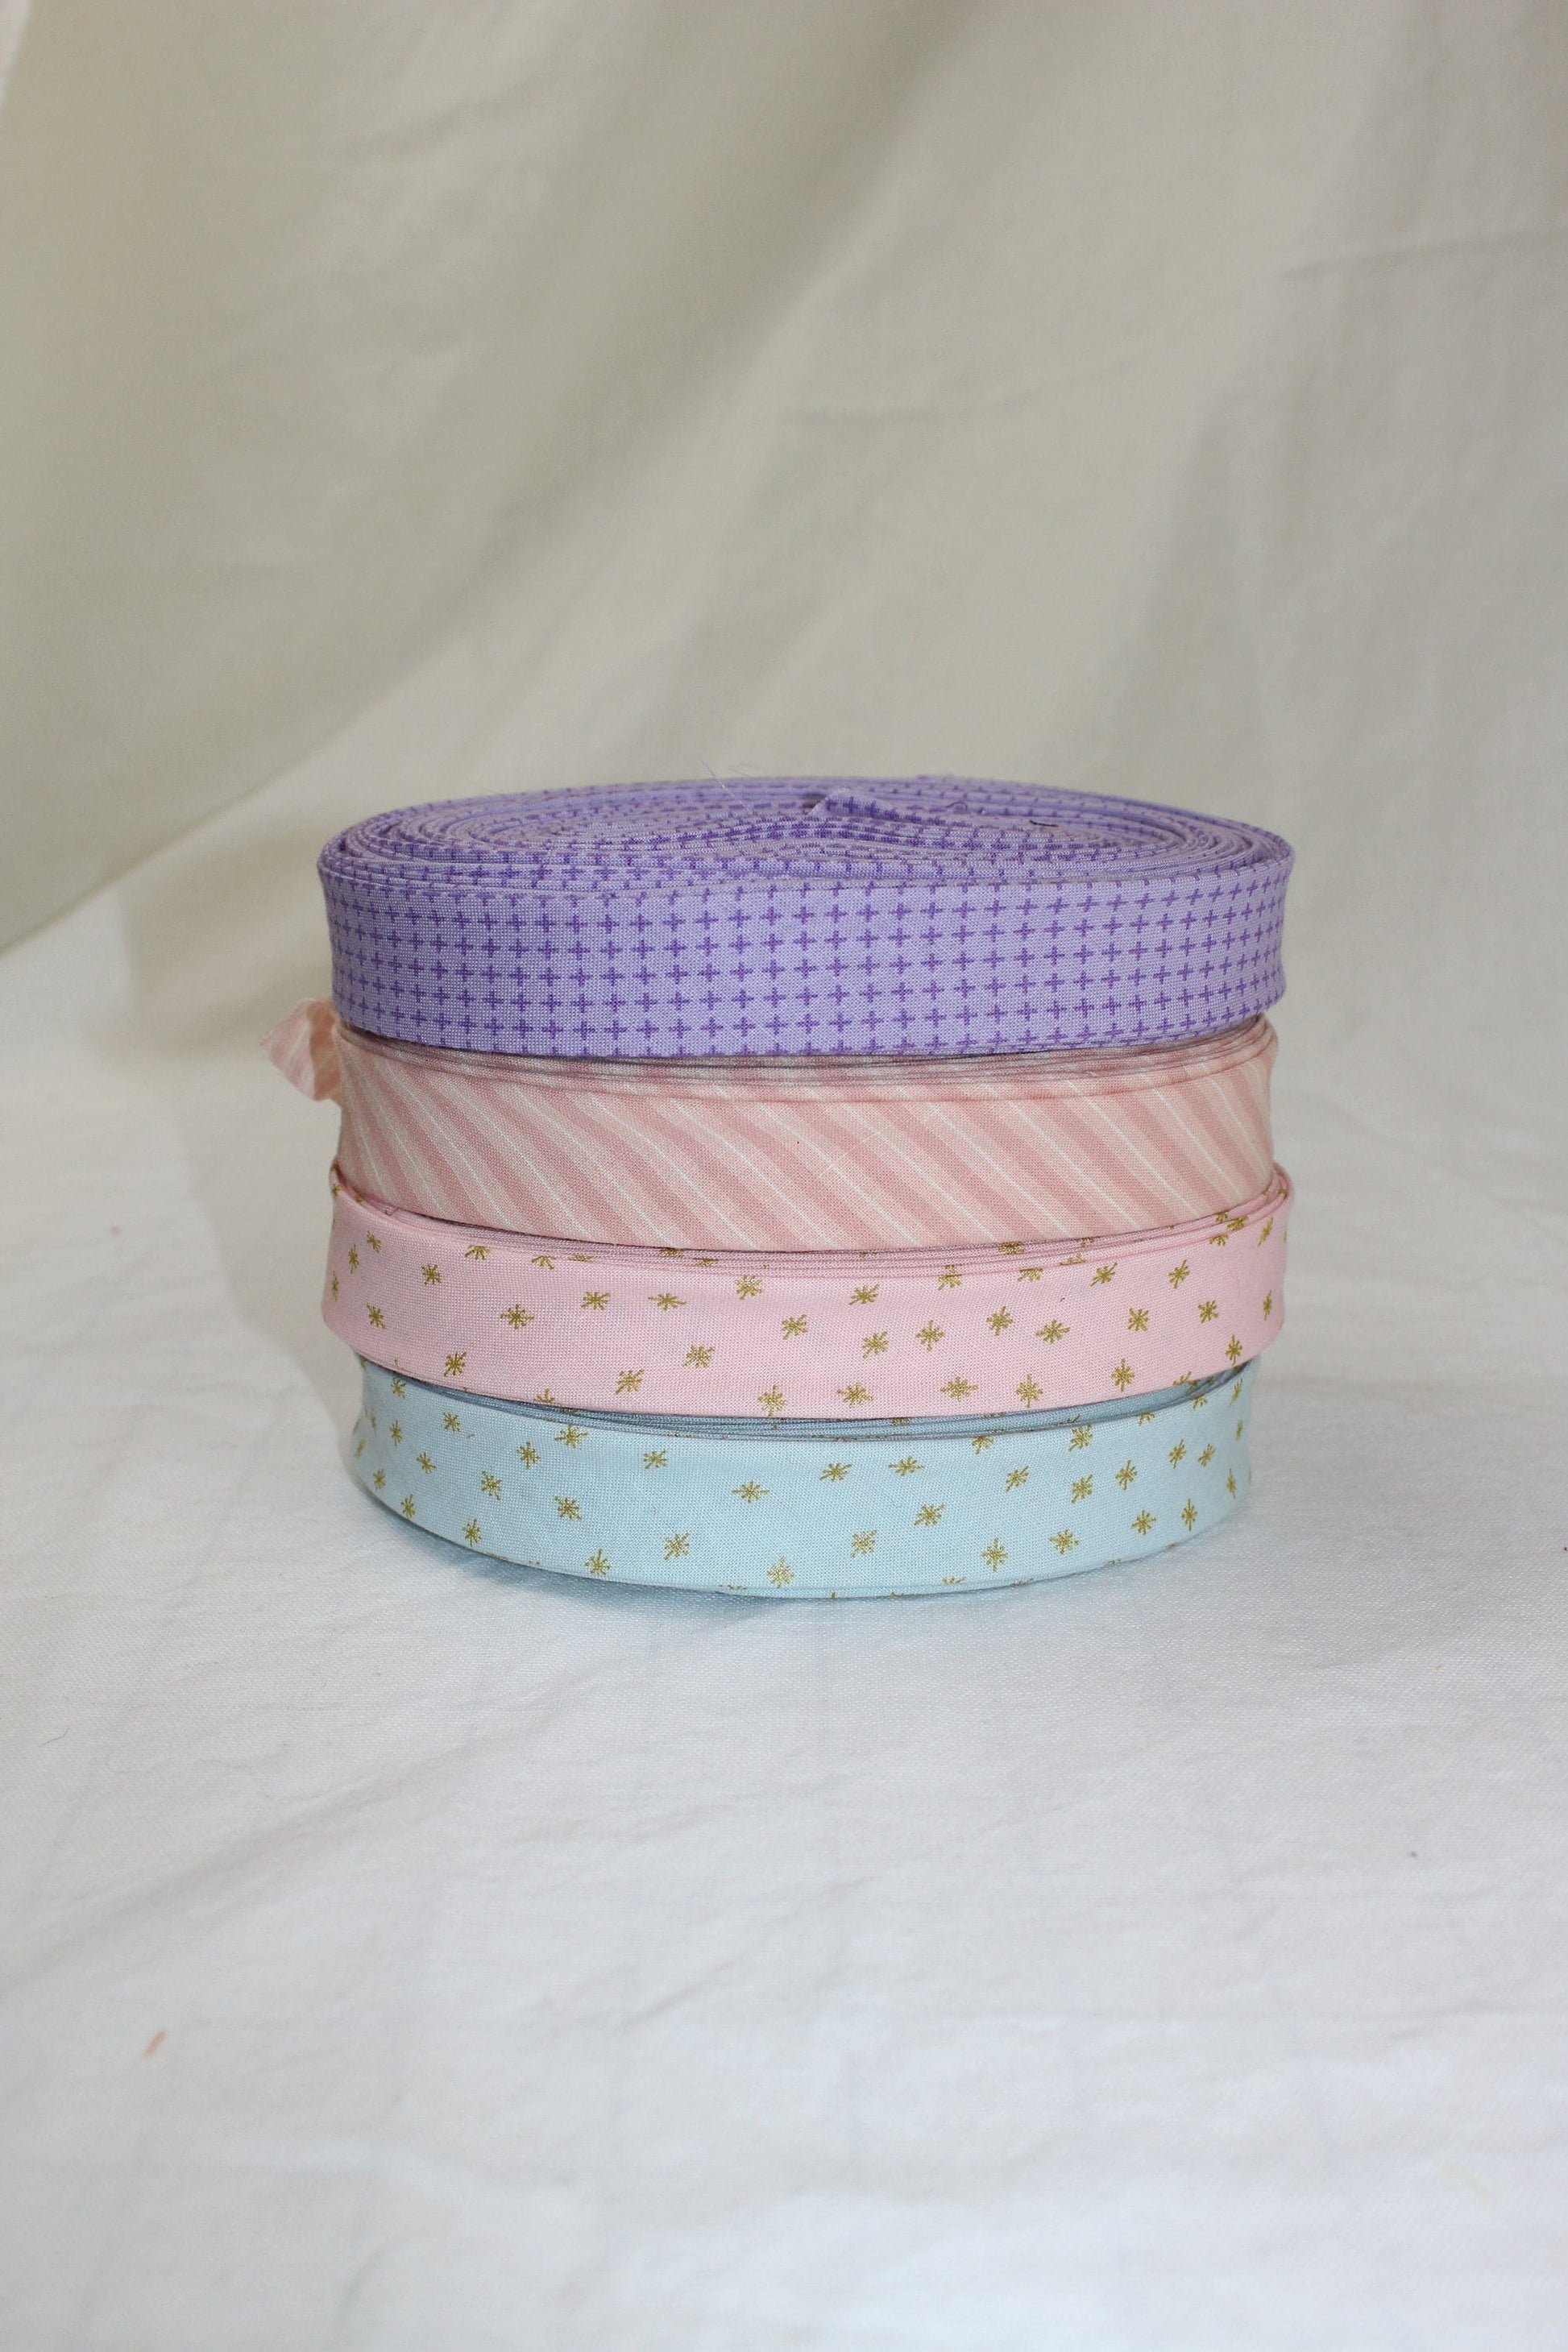 Bias Binding (Tape) 25mm, Cotton, Single Fold, purple, blue, pink. Fusible iron on available.